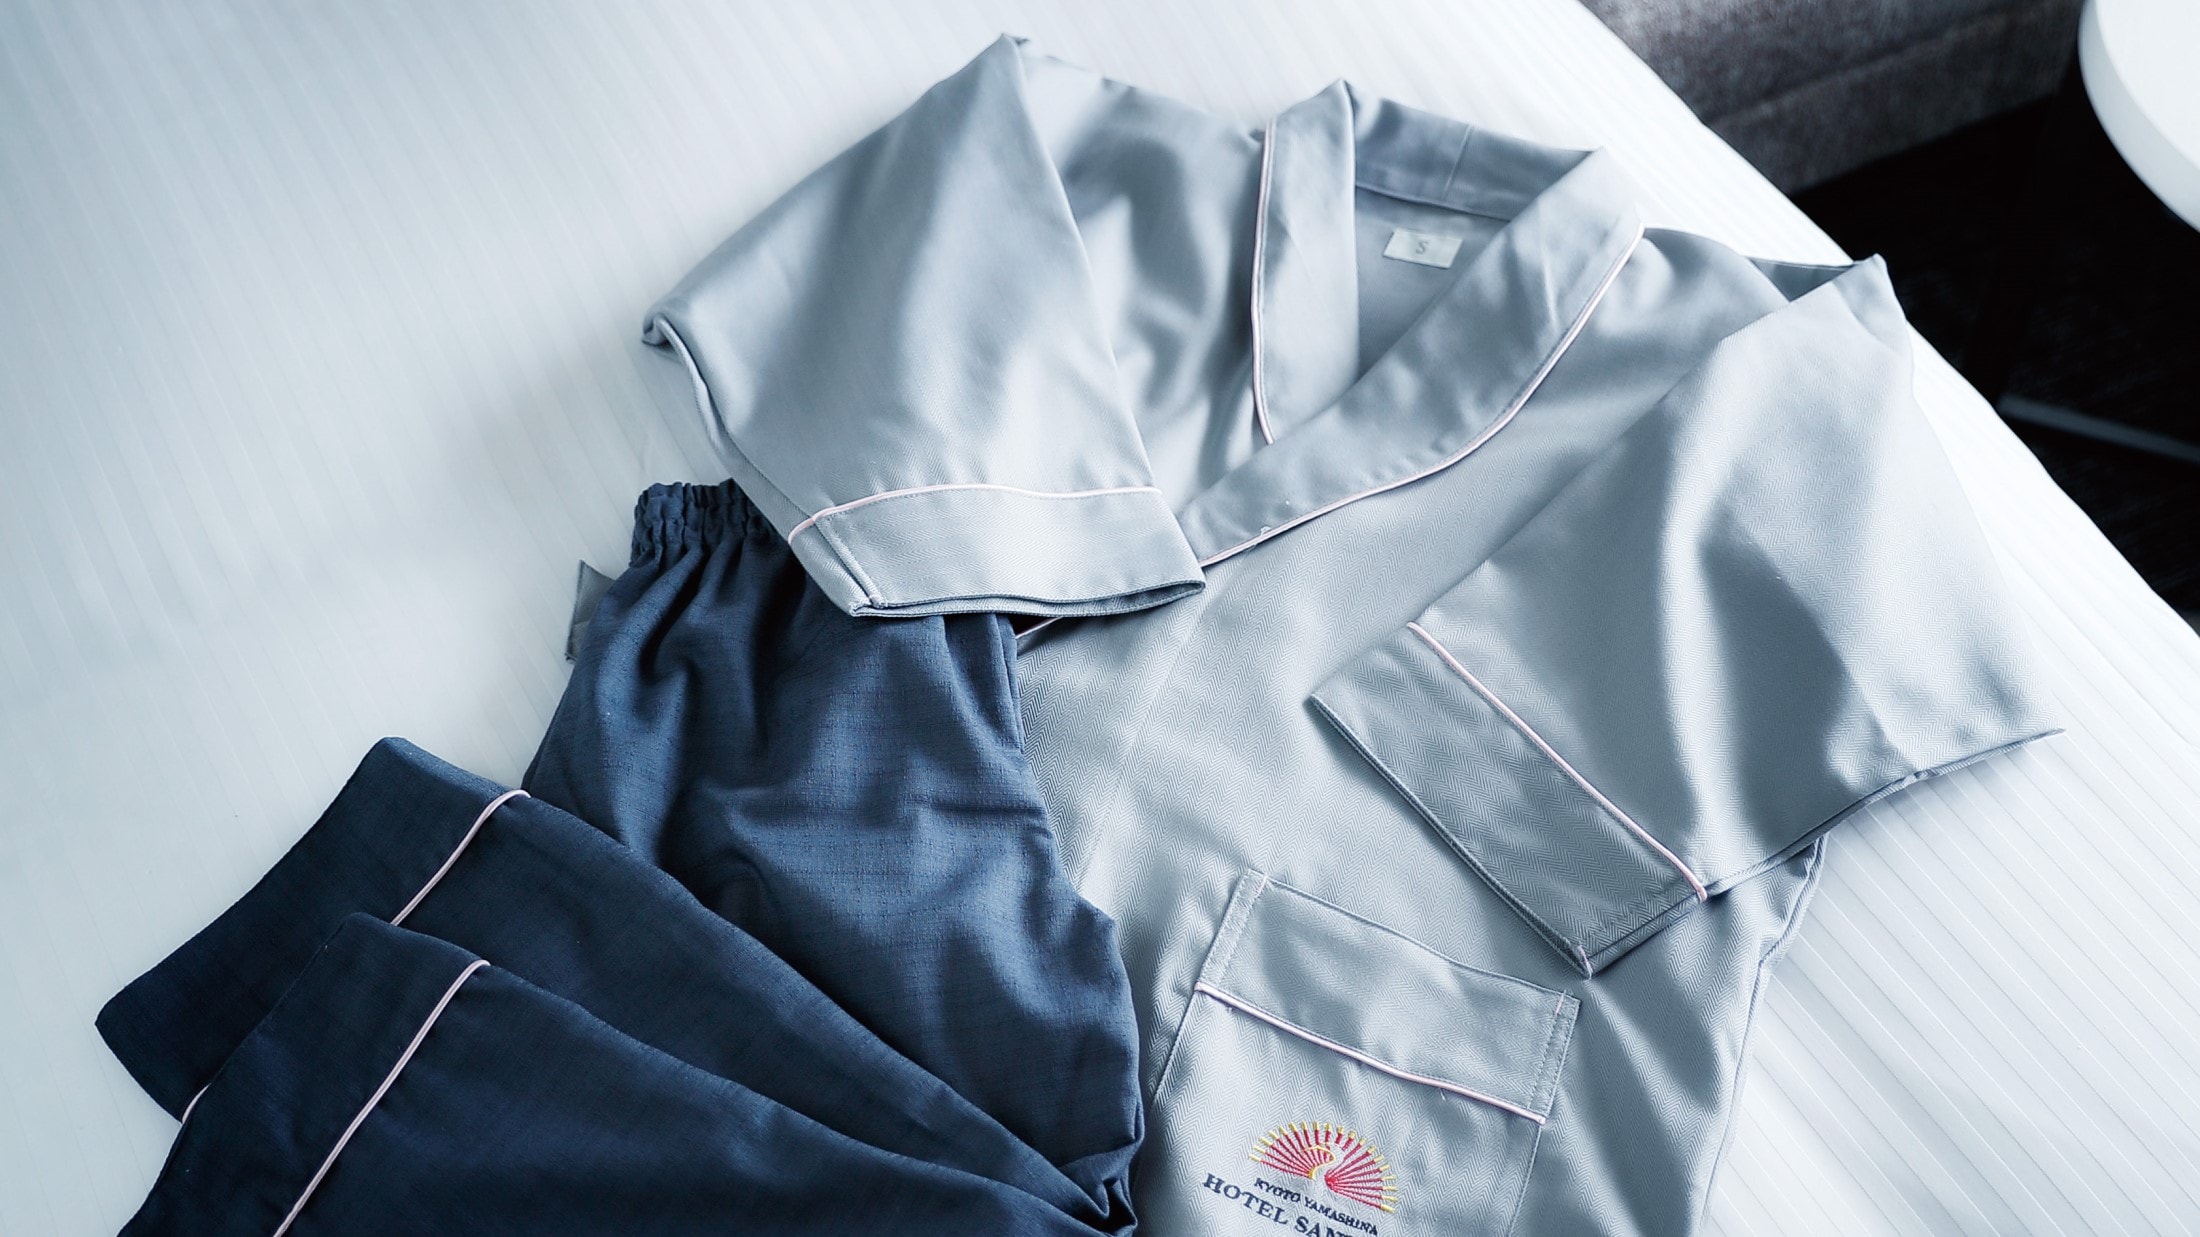 Room wear with hotel logo